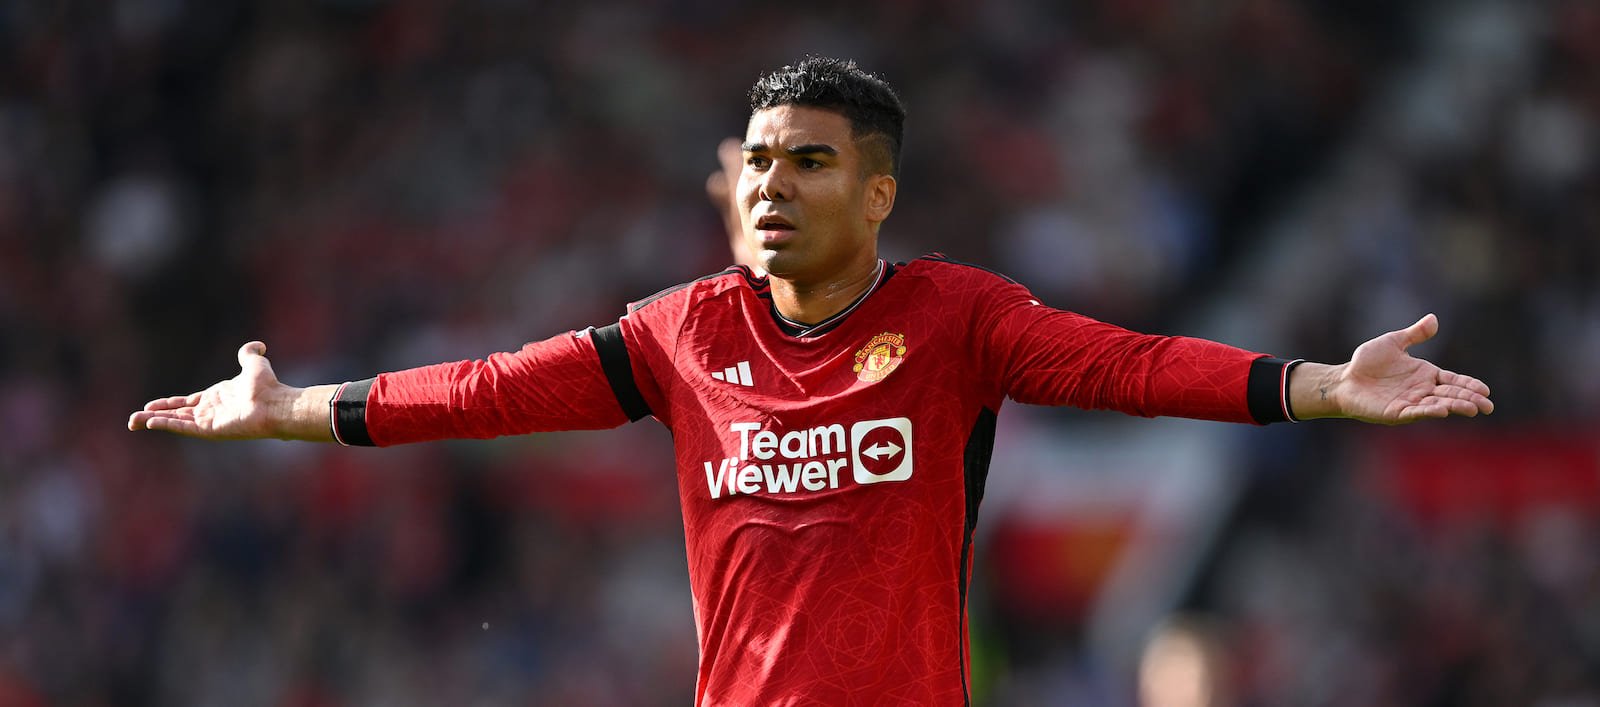 Casemiro subbed off due to injury during Brazil vs Venezuela World Cup Qualifier – Man United News And Transfer News